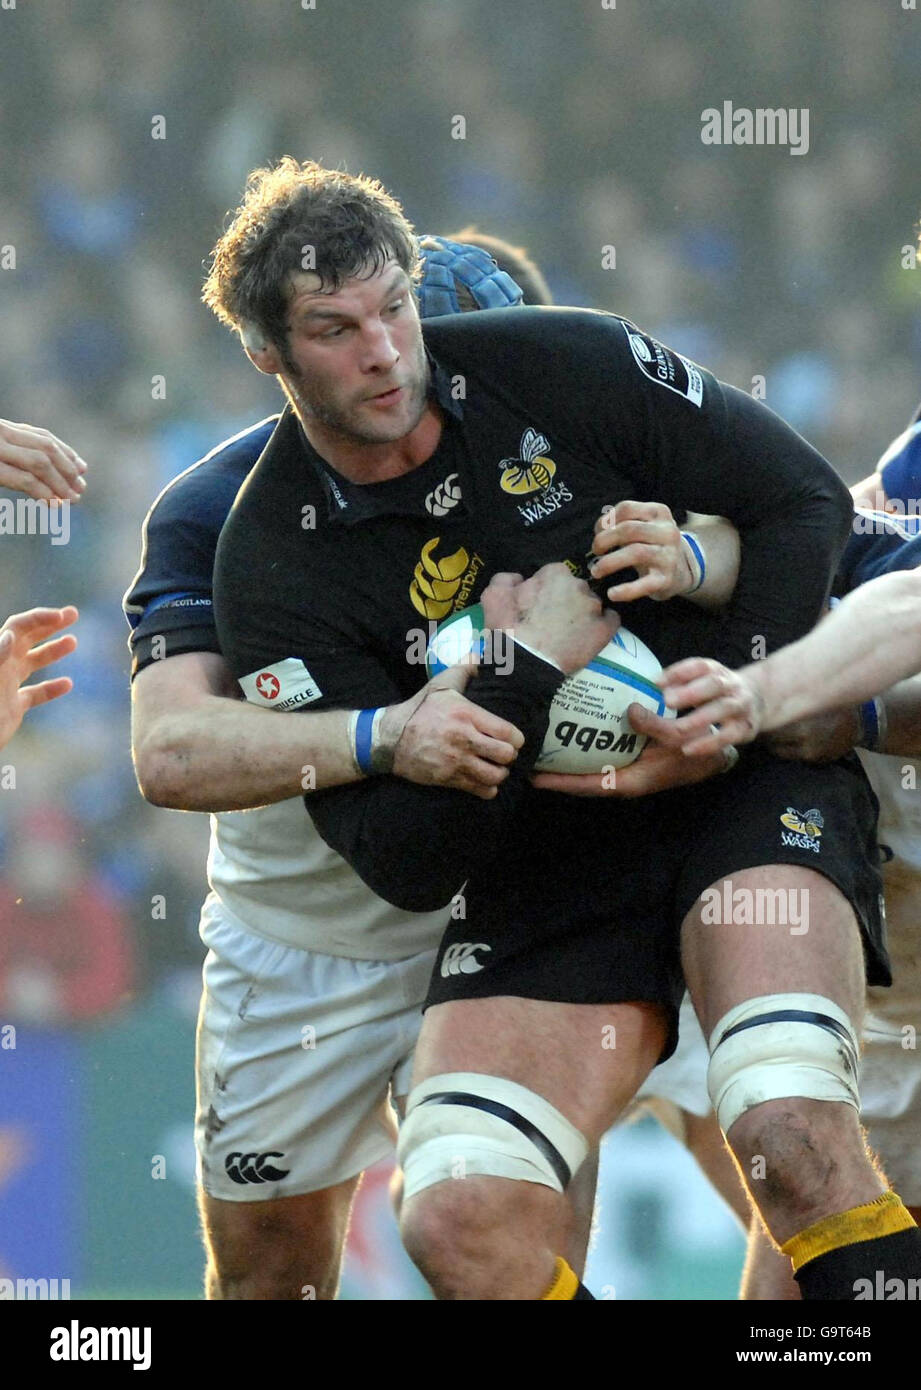 Rugby Union - European Cup - Wasps v Leinster. Wasps lock Simon Shaw (v Leinster European Cup 31-3-07). Stock Photo